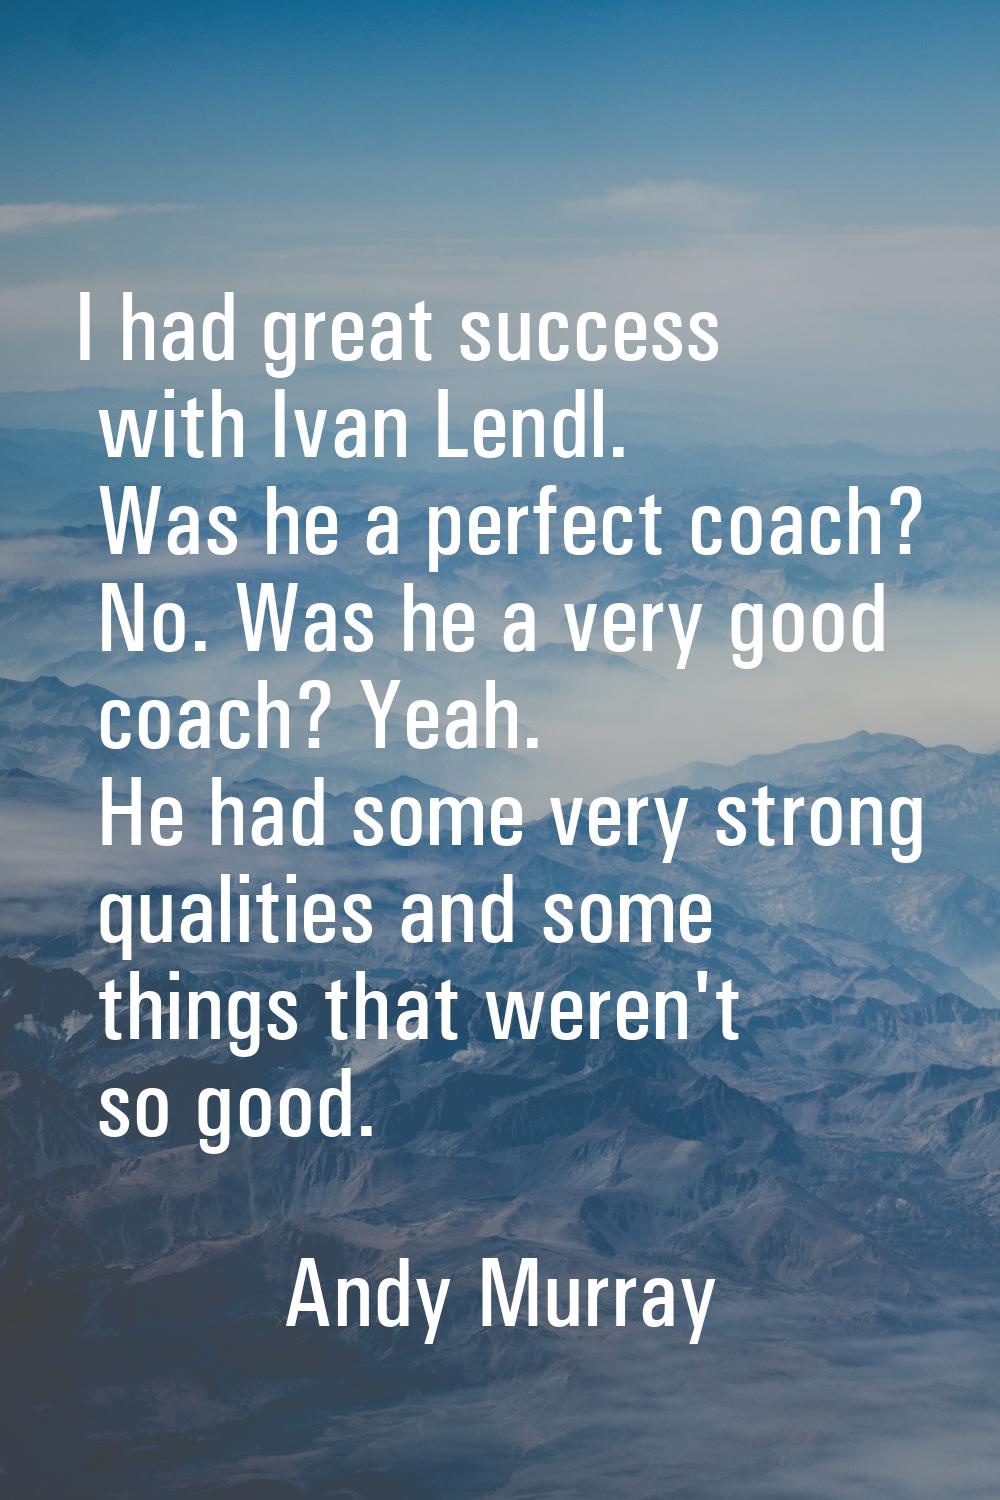 I had great success with Ivan Lendl. Was he a perfect coach? No. Was he a very good coach? Yeah. He